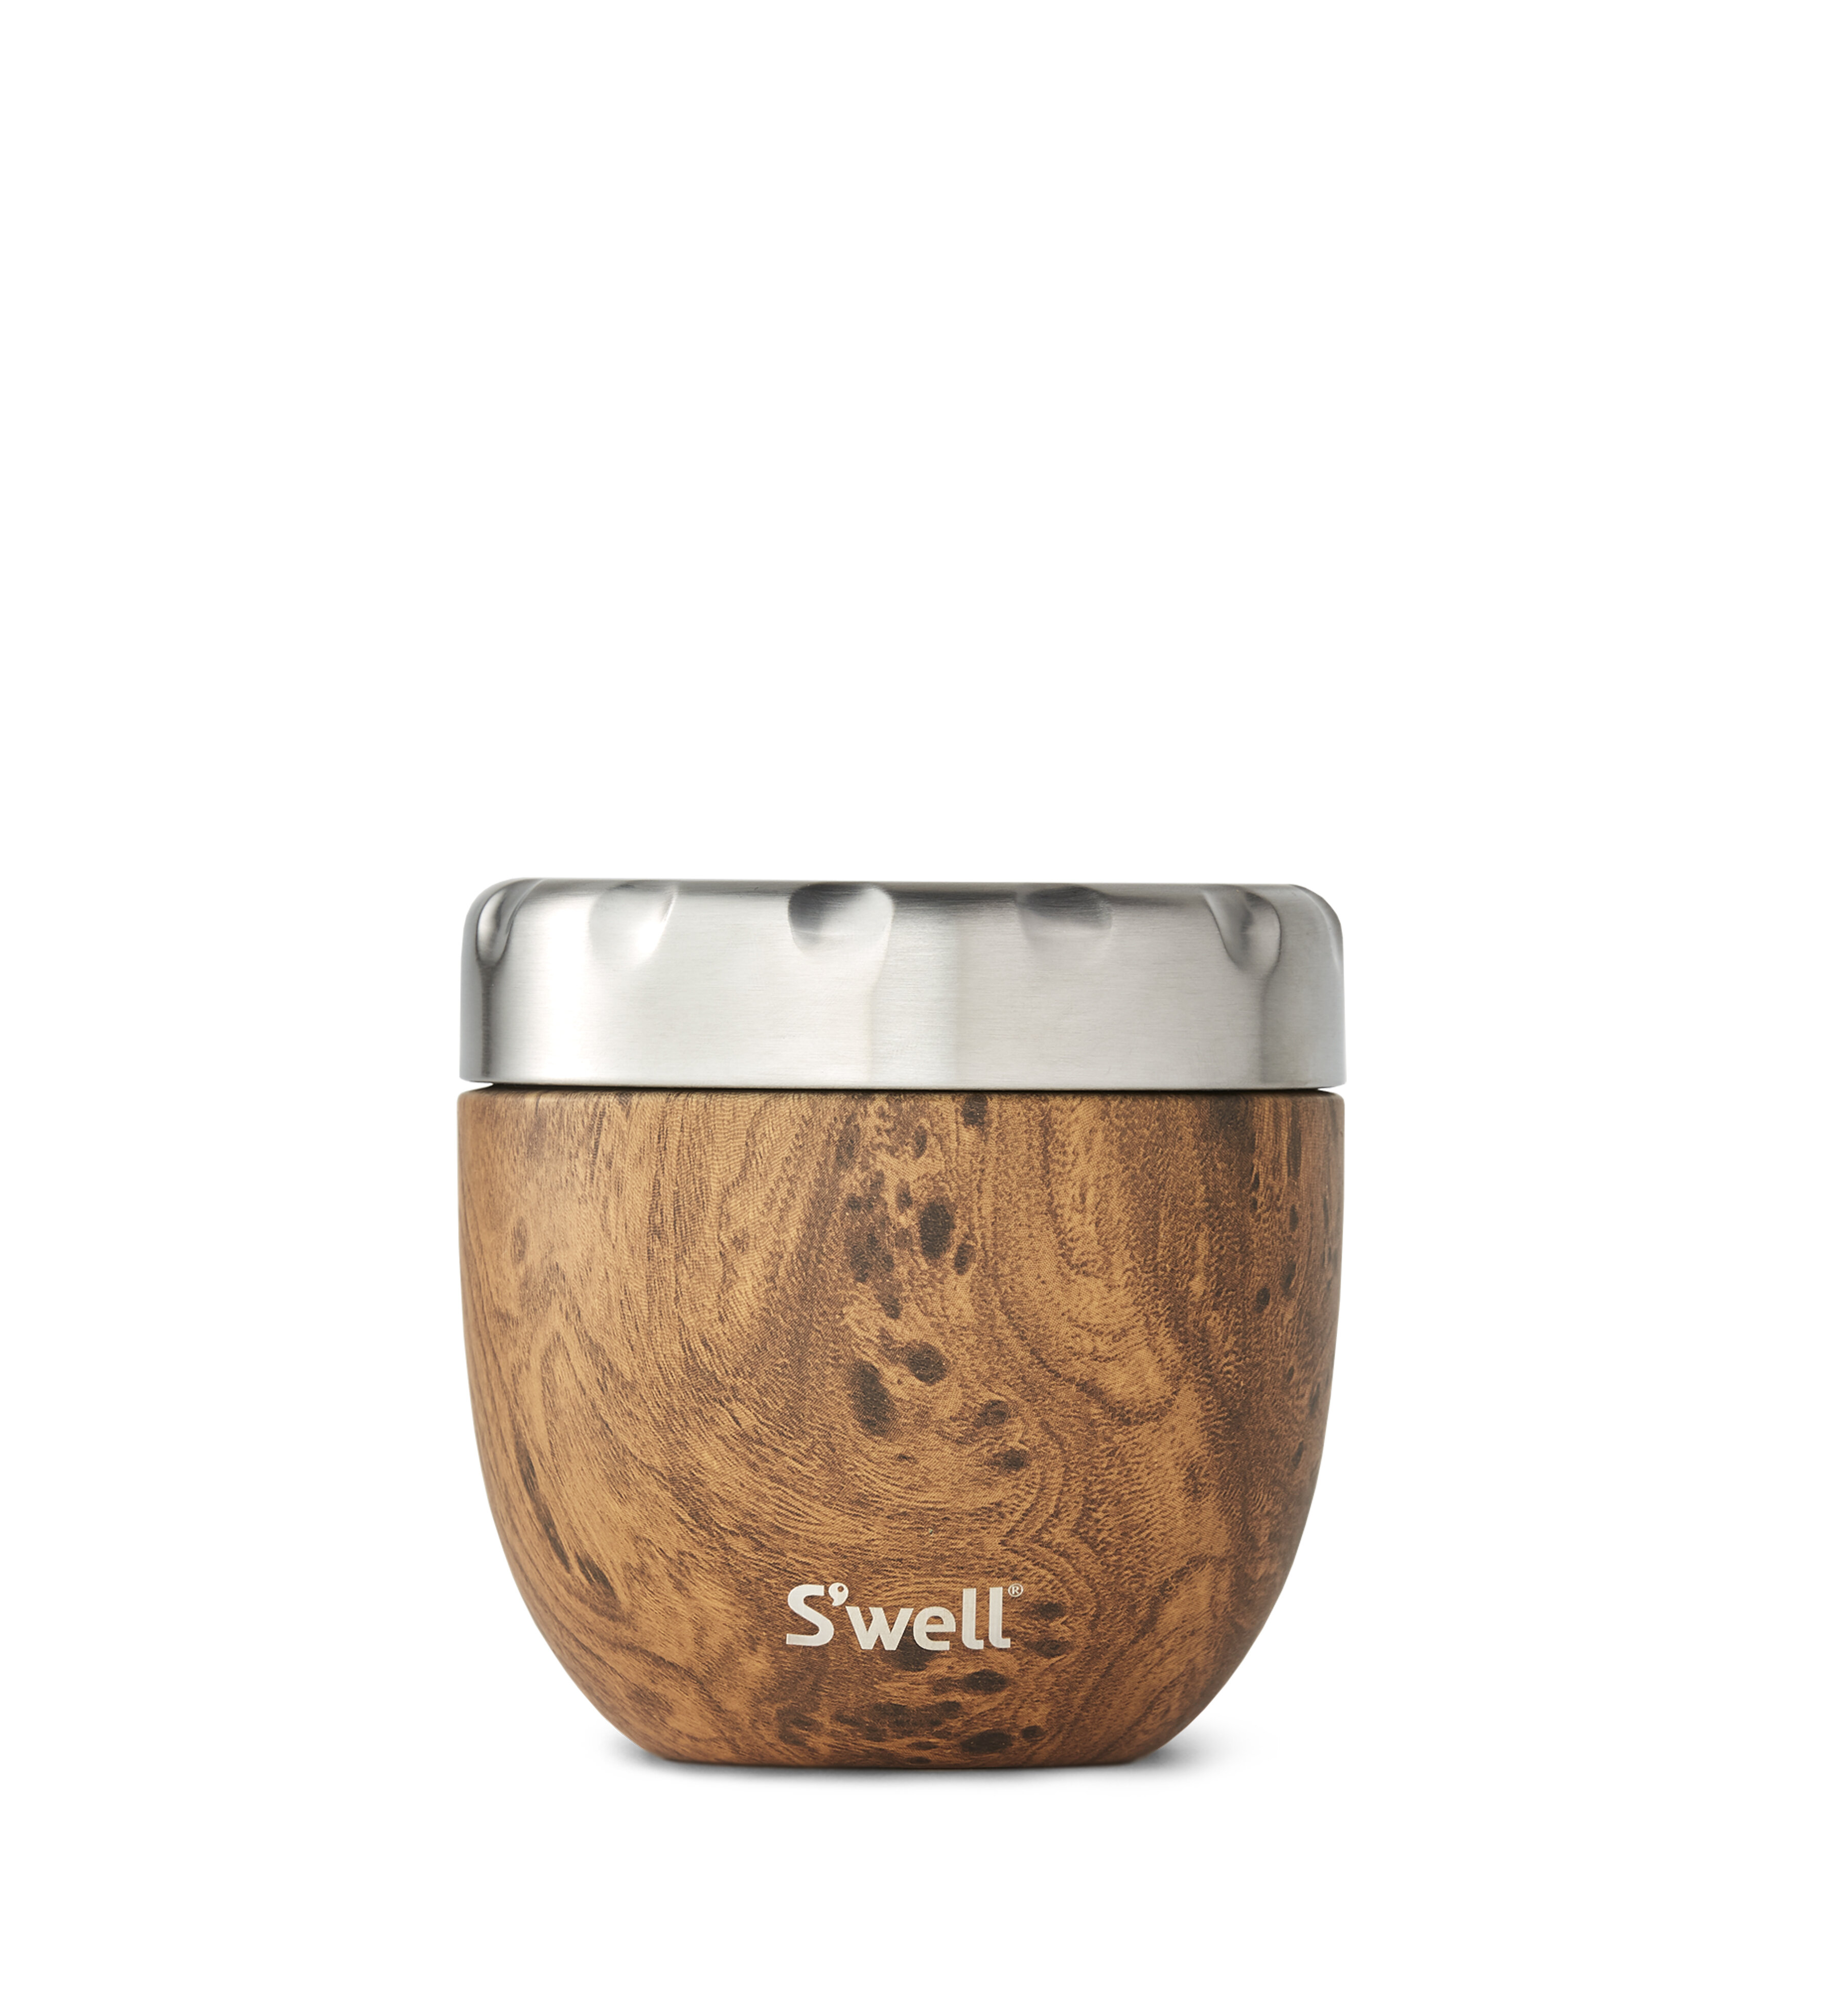 SWELL S'well Eats Insulated Stainless Steel Bowl Steel Blue Used